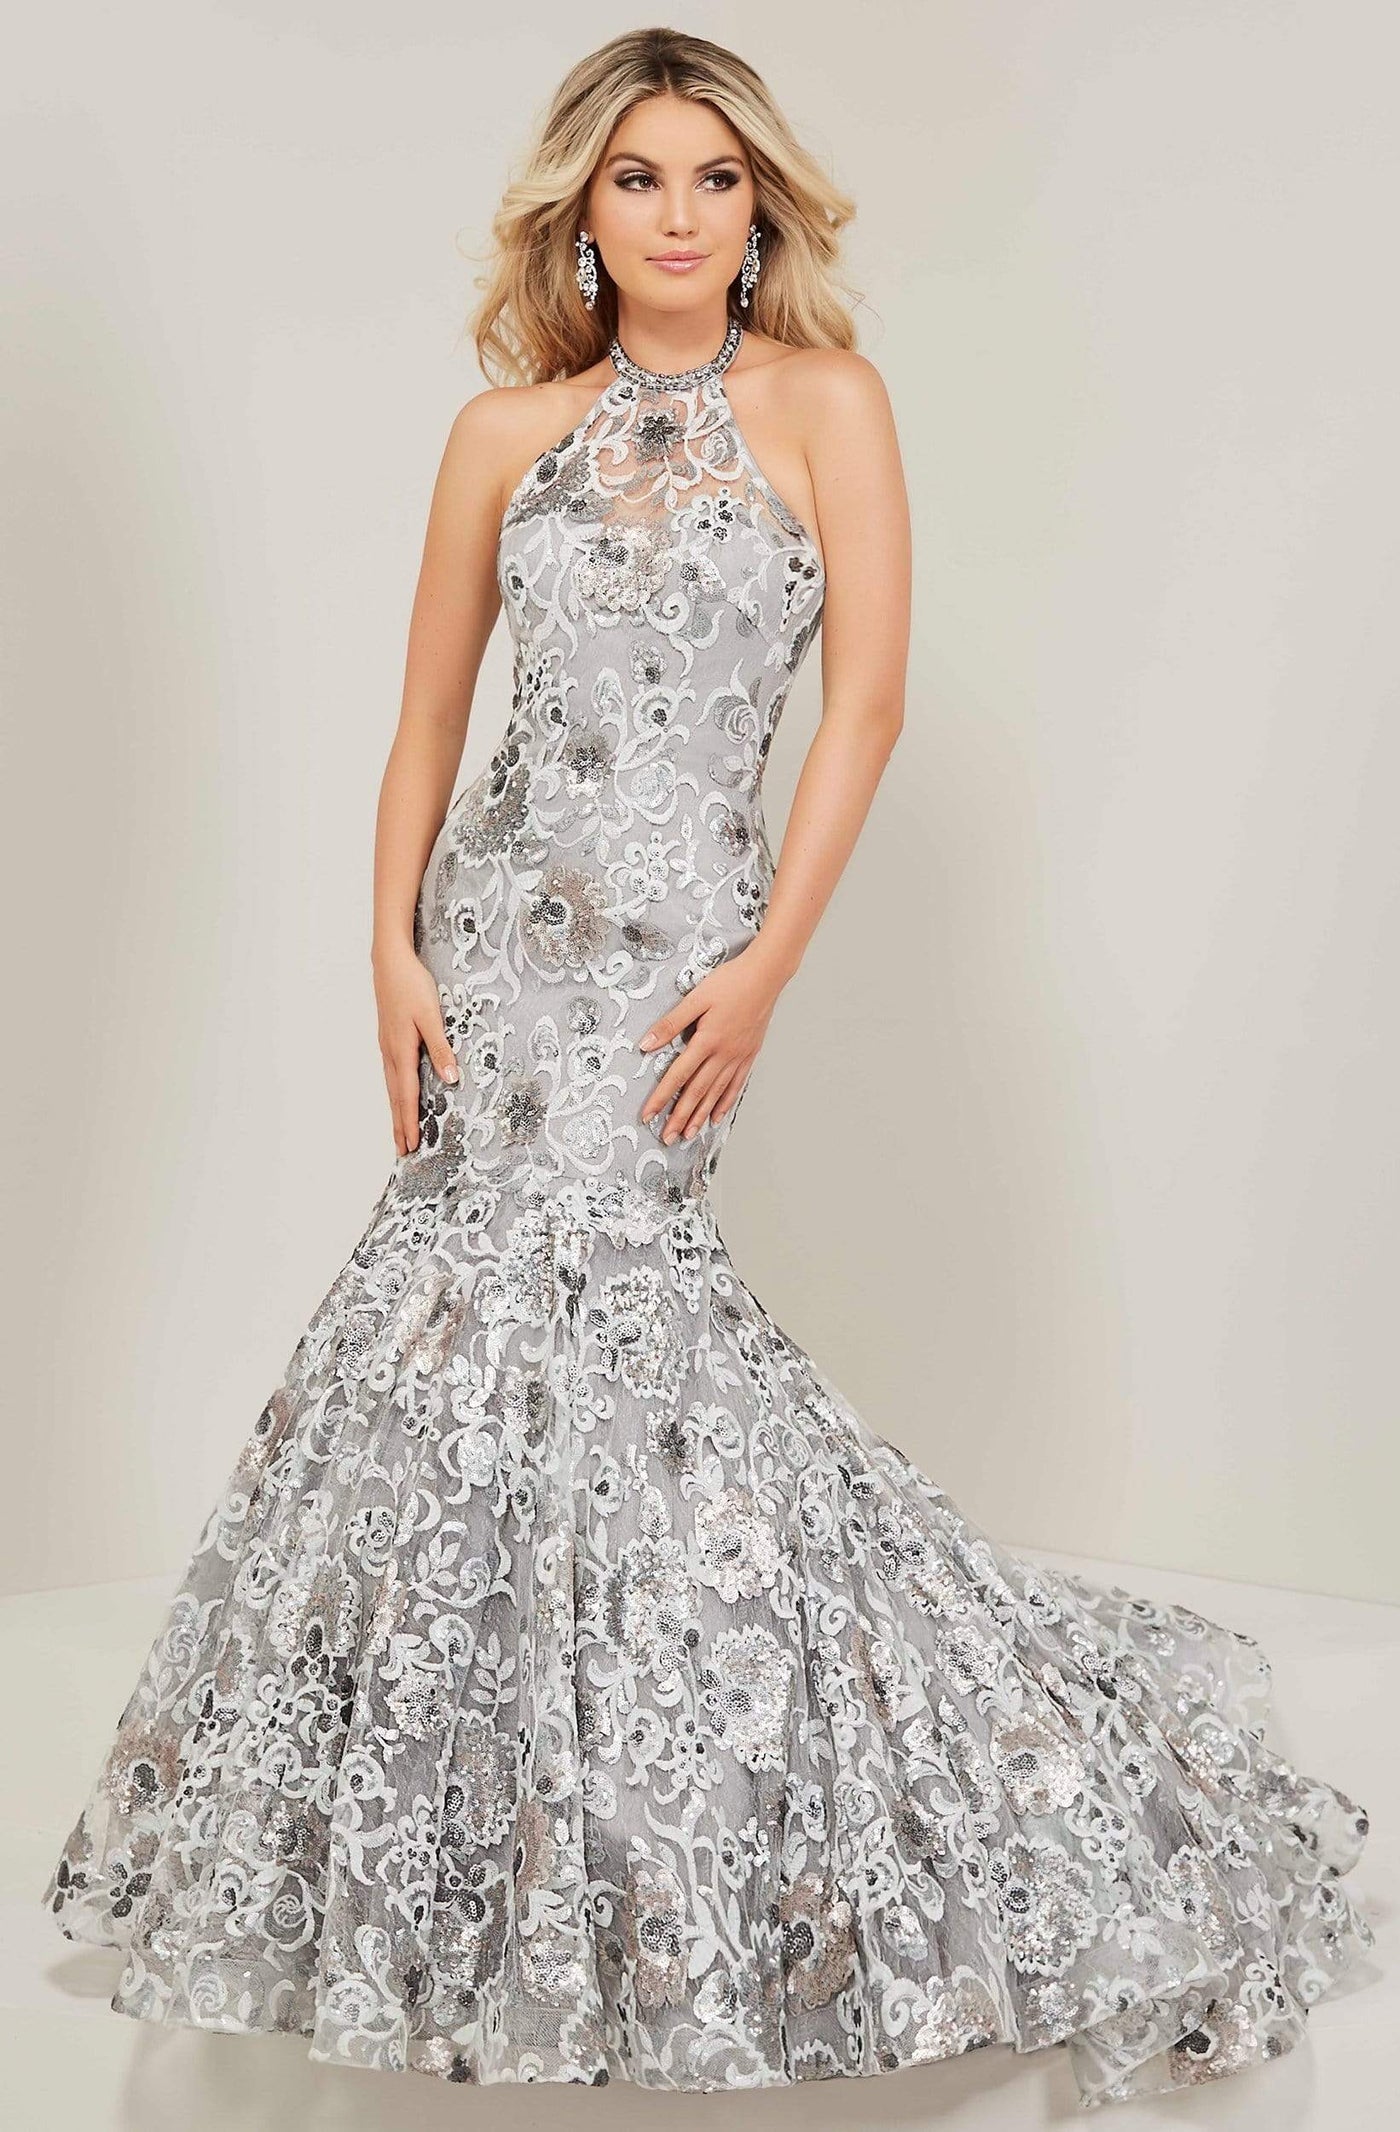 Tiffany Designs - 16366 Floral Sequined Illusion Halter Mermaid Gown Special Occasion Dress 0 / Platinum/Slate